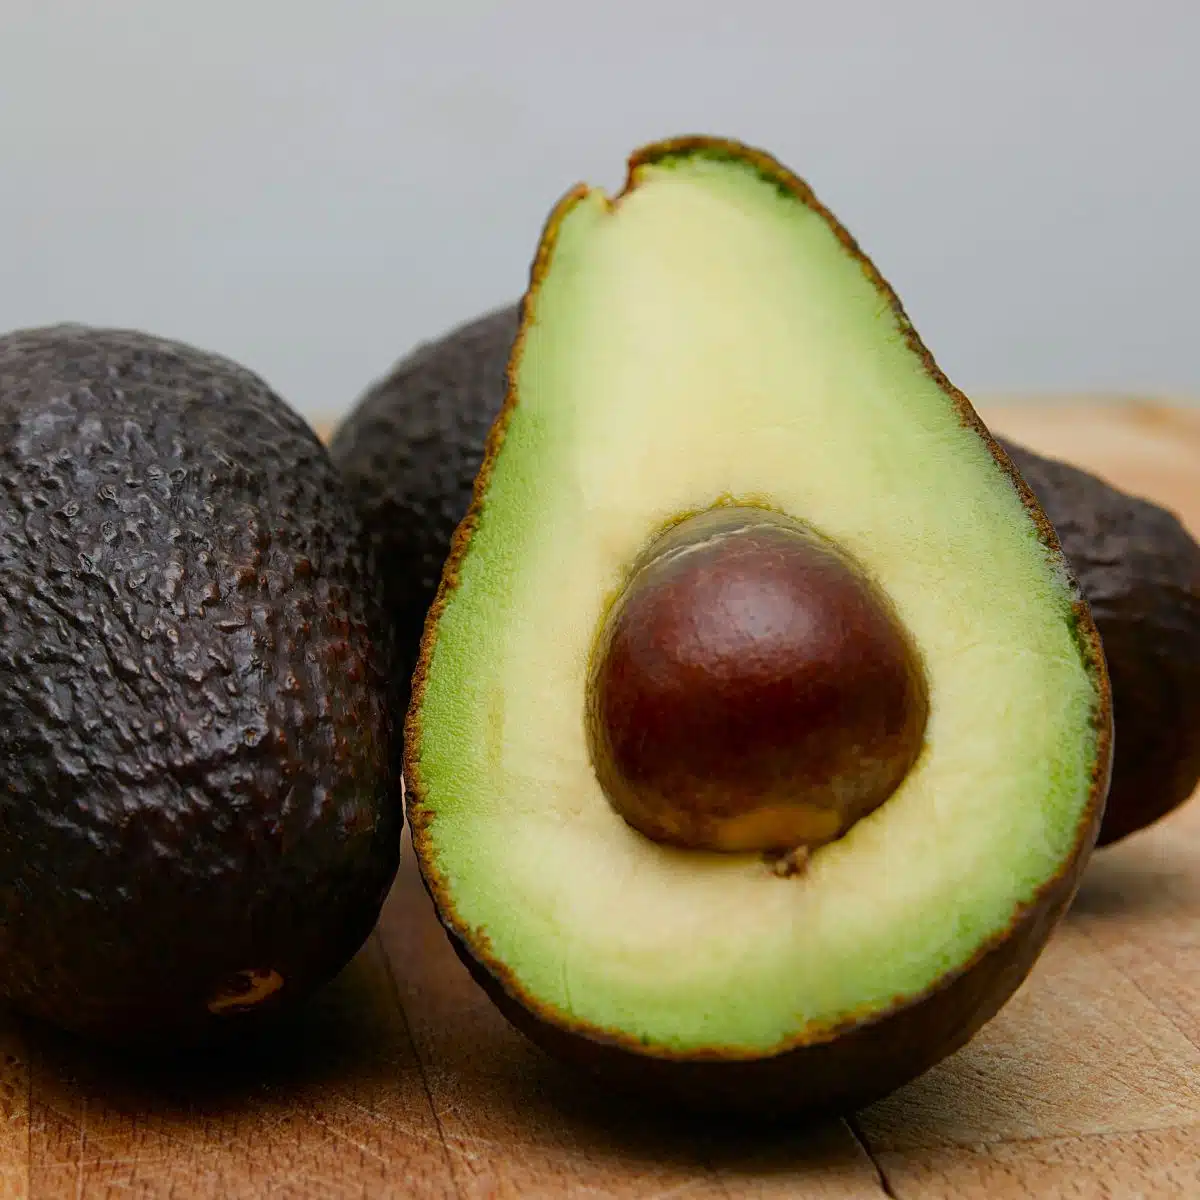 Are Avocados Low FODMAP?